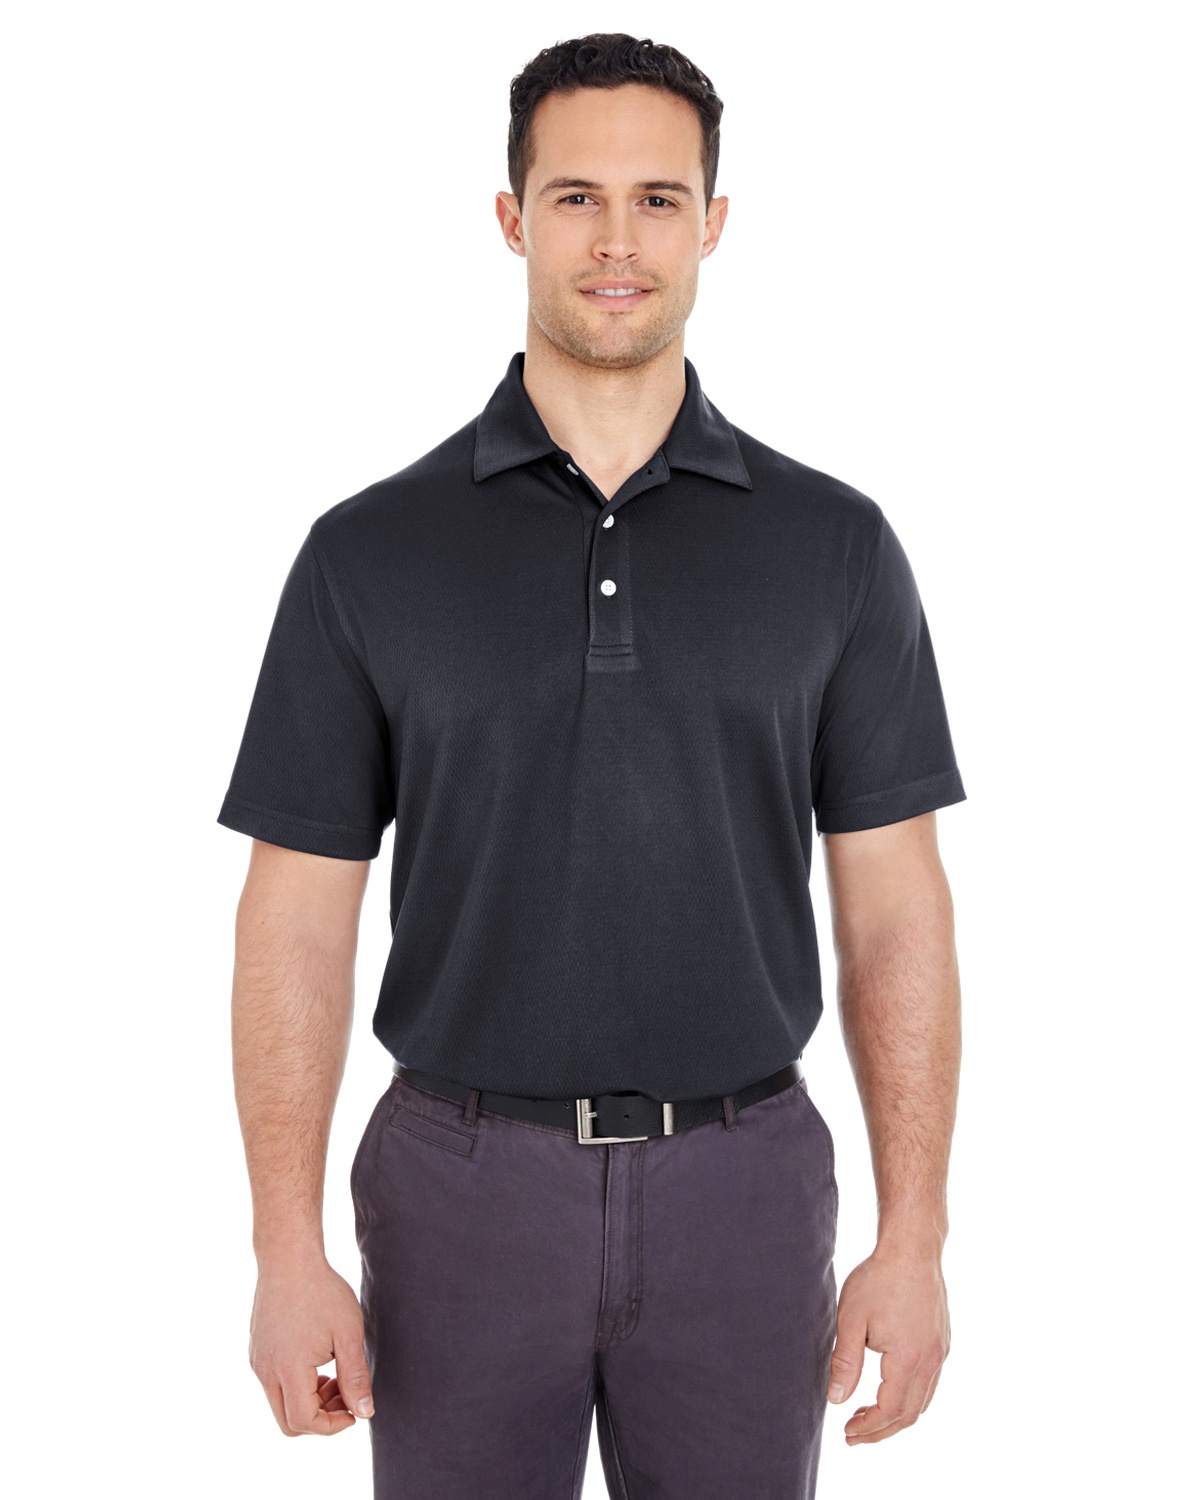 Ultra Club Mens Platinum Performance Pique Polo with Tempcontrol Technology